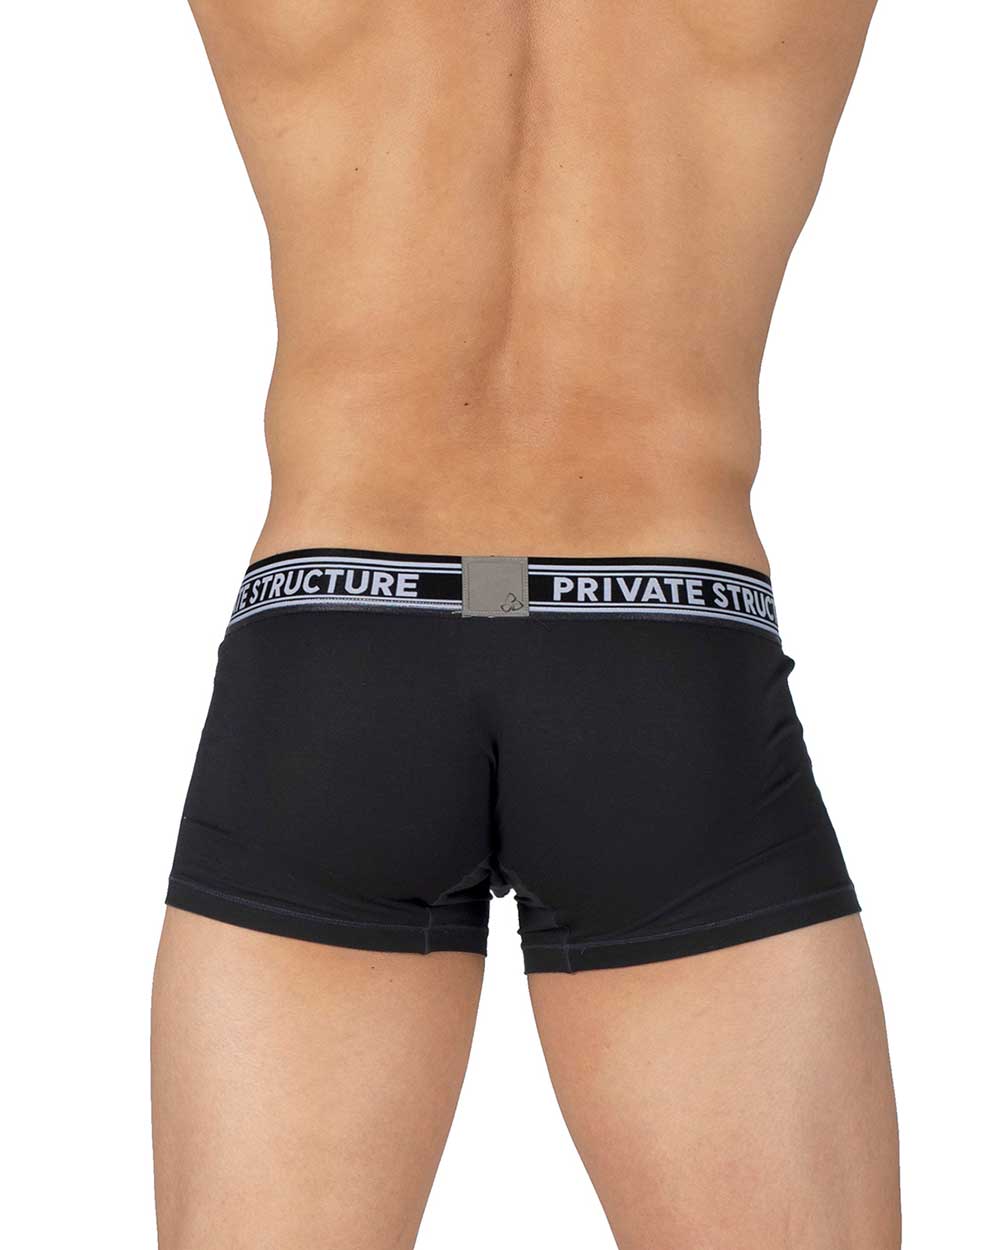 Viscose From Bamboo Mid Waist Trunk - Raven Black - [4379]